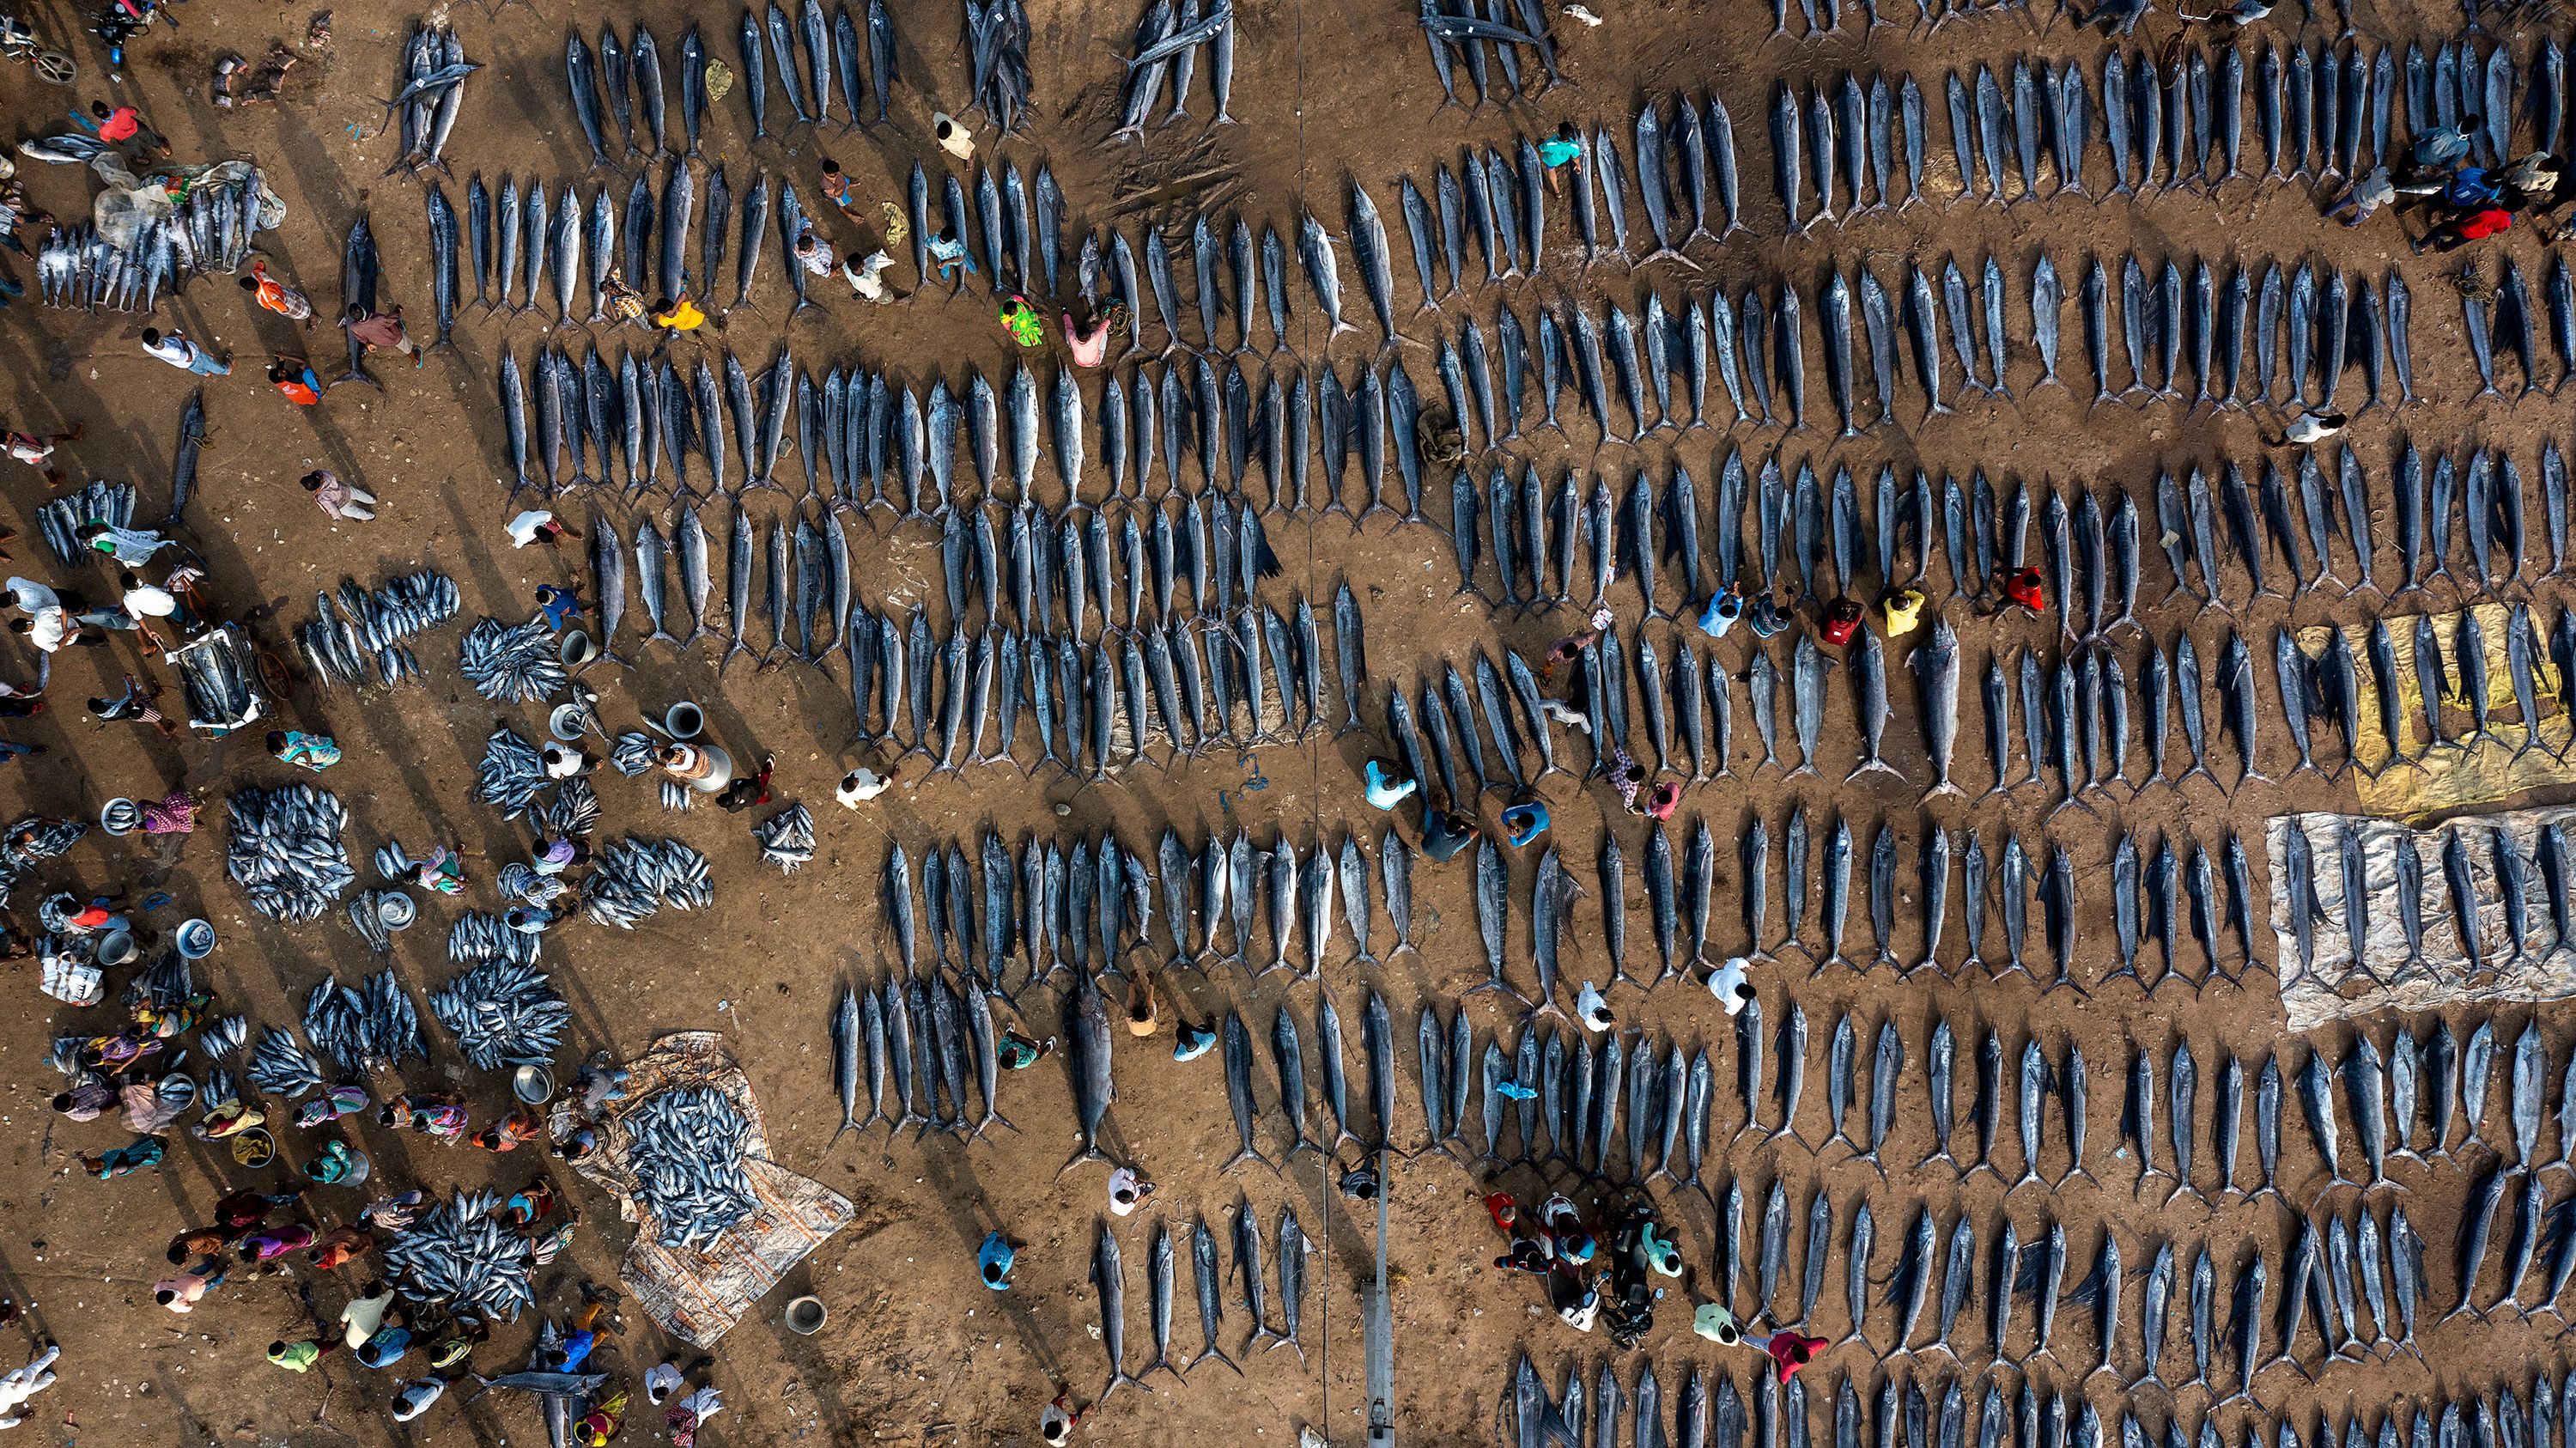 Srikanth Mannepuri takes a sobering look at the scale of unsustainable fishing in Andhra Pradesh, India. Mannepuri was shocked to see so many recently caught marlin and sailfish at a fish market in one morning. He used a drone to take the image from a bird's-eye view. Sailfish and marlin are top ocean predators essential to ecosystems. 